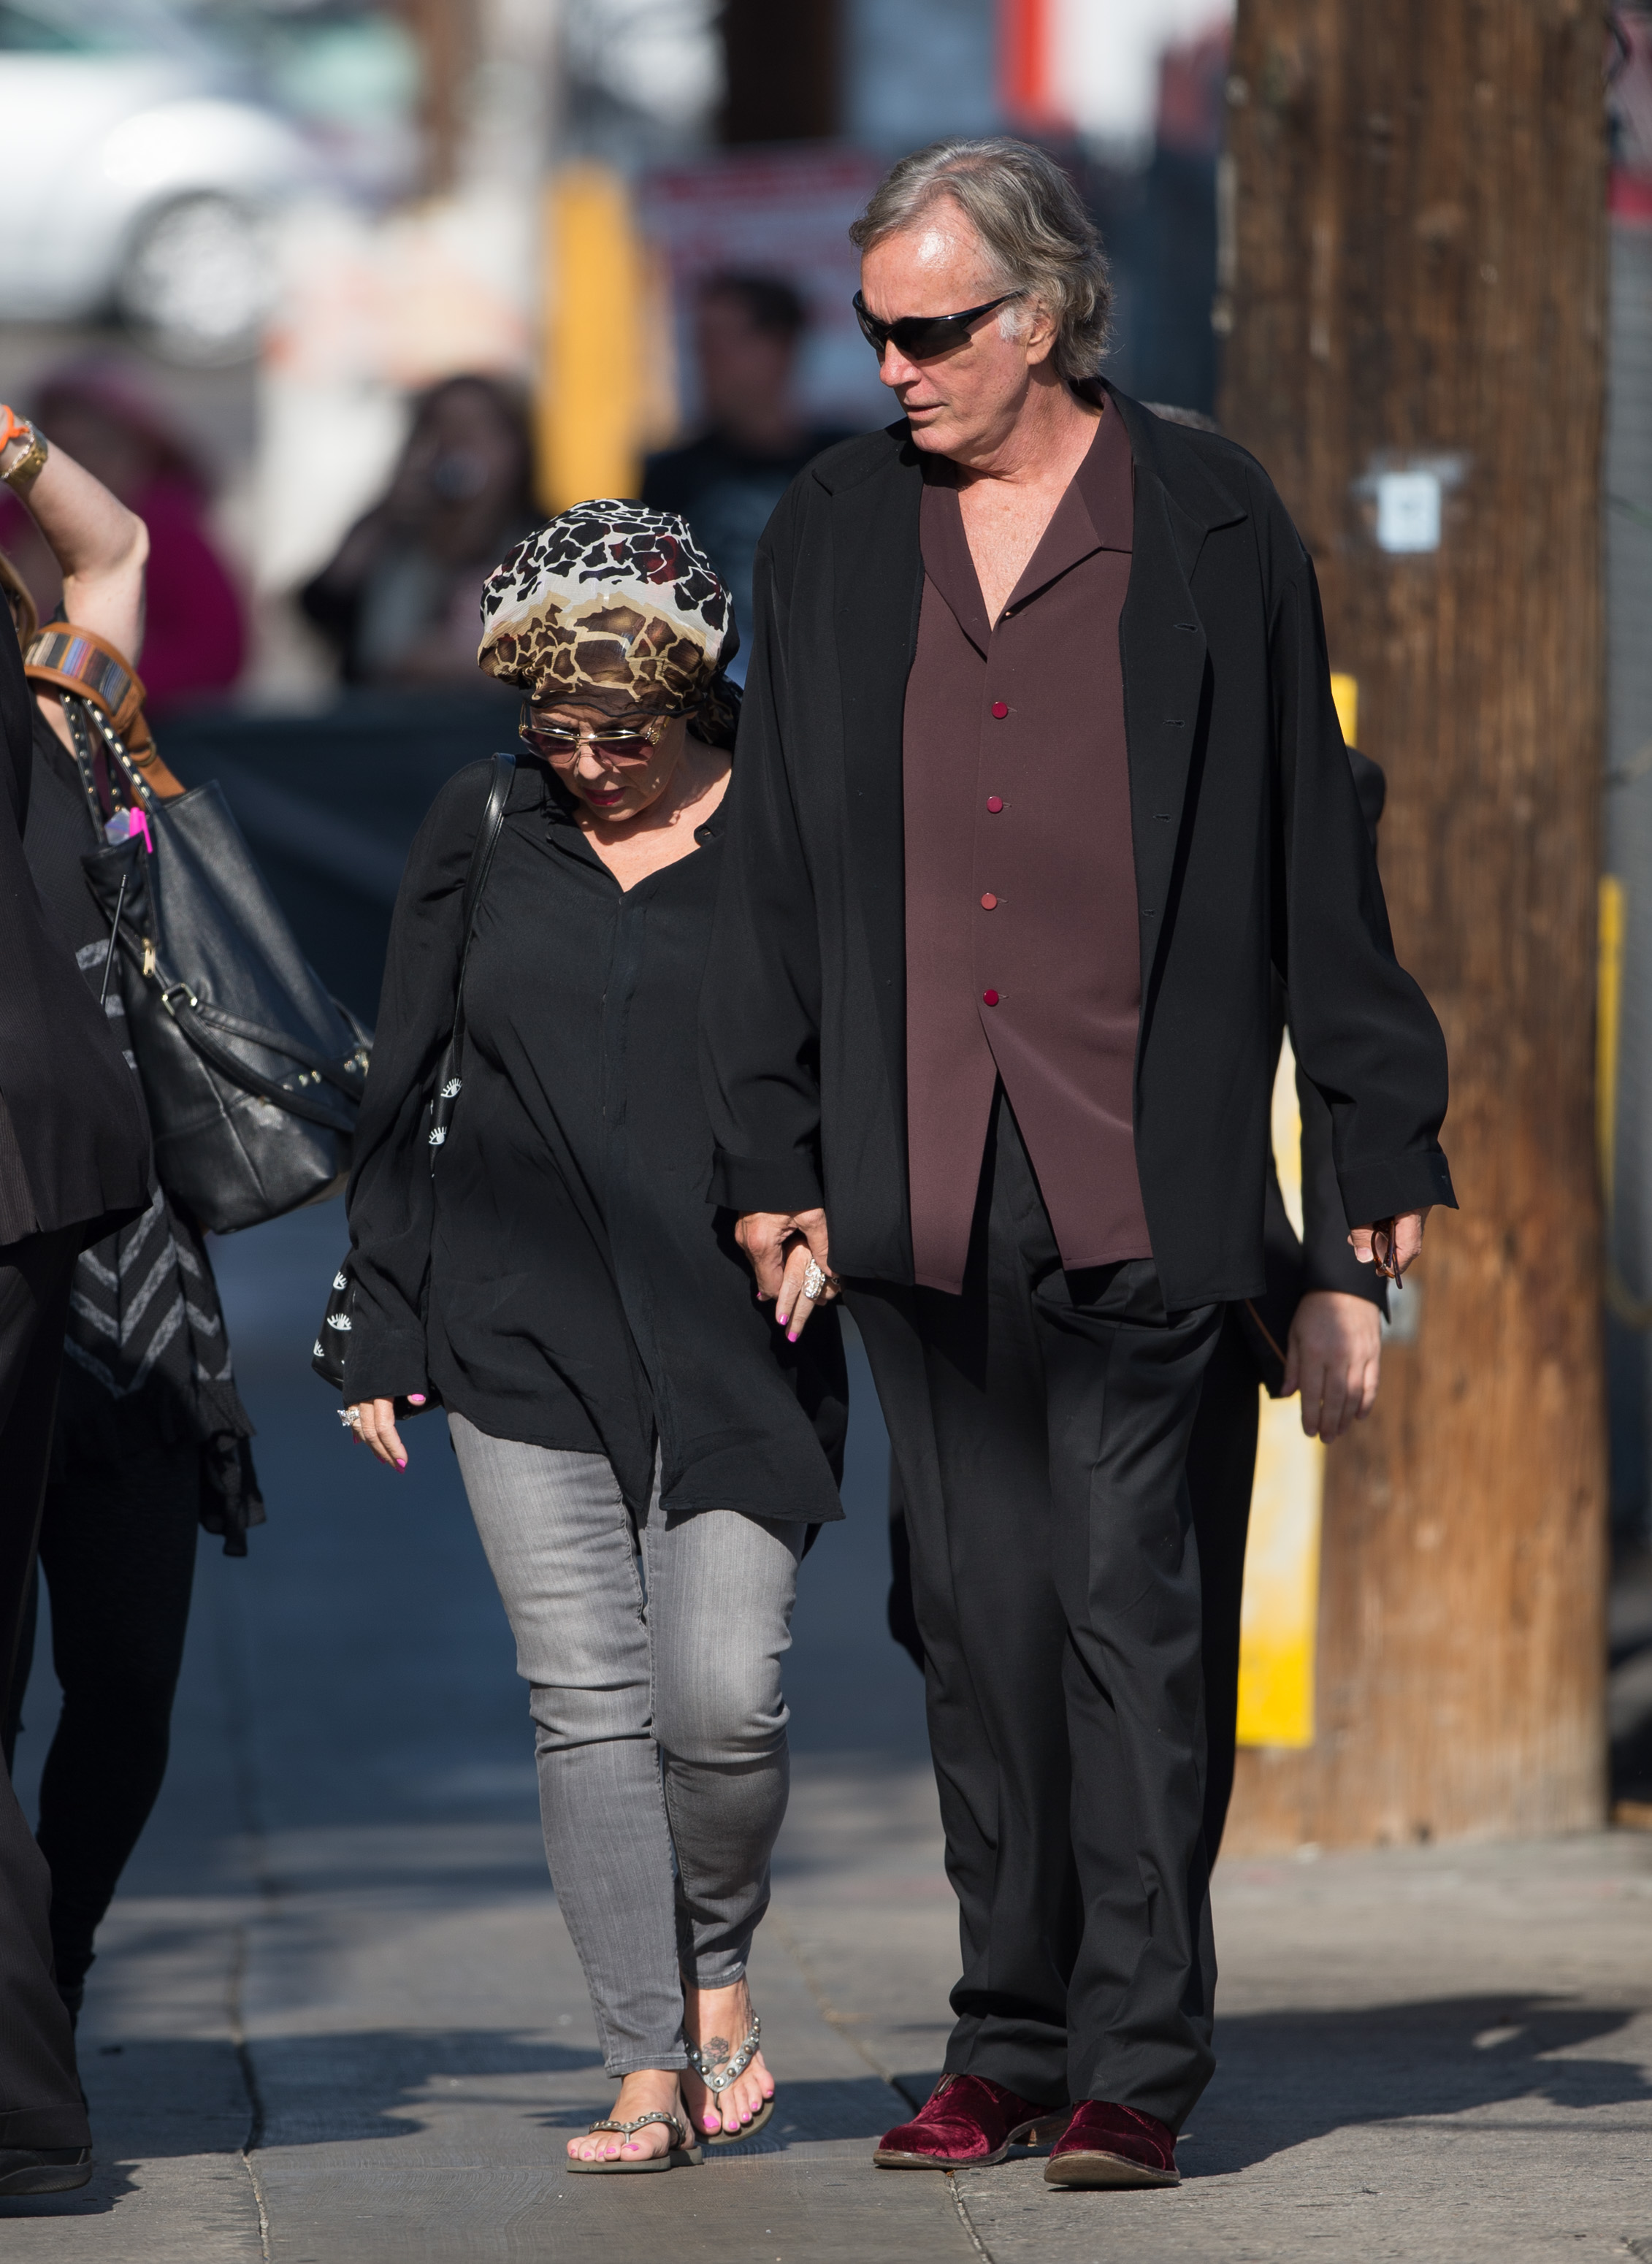 Johnny Argent and Roseanne Barr on photographed in Hollywood in 2014 | Source: Getty Images